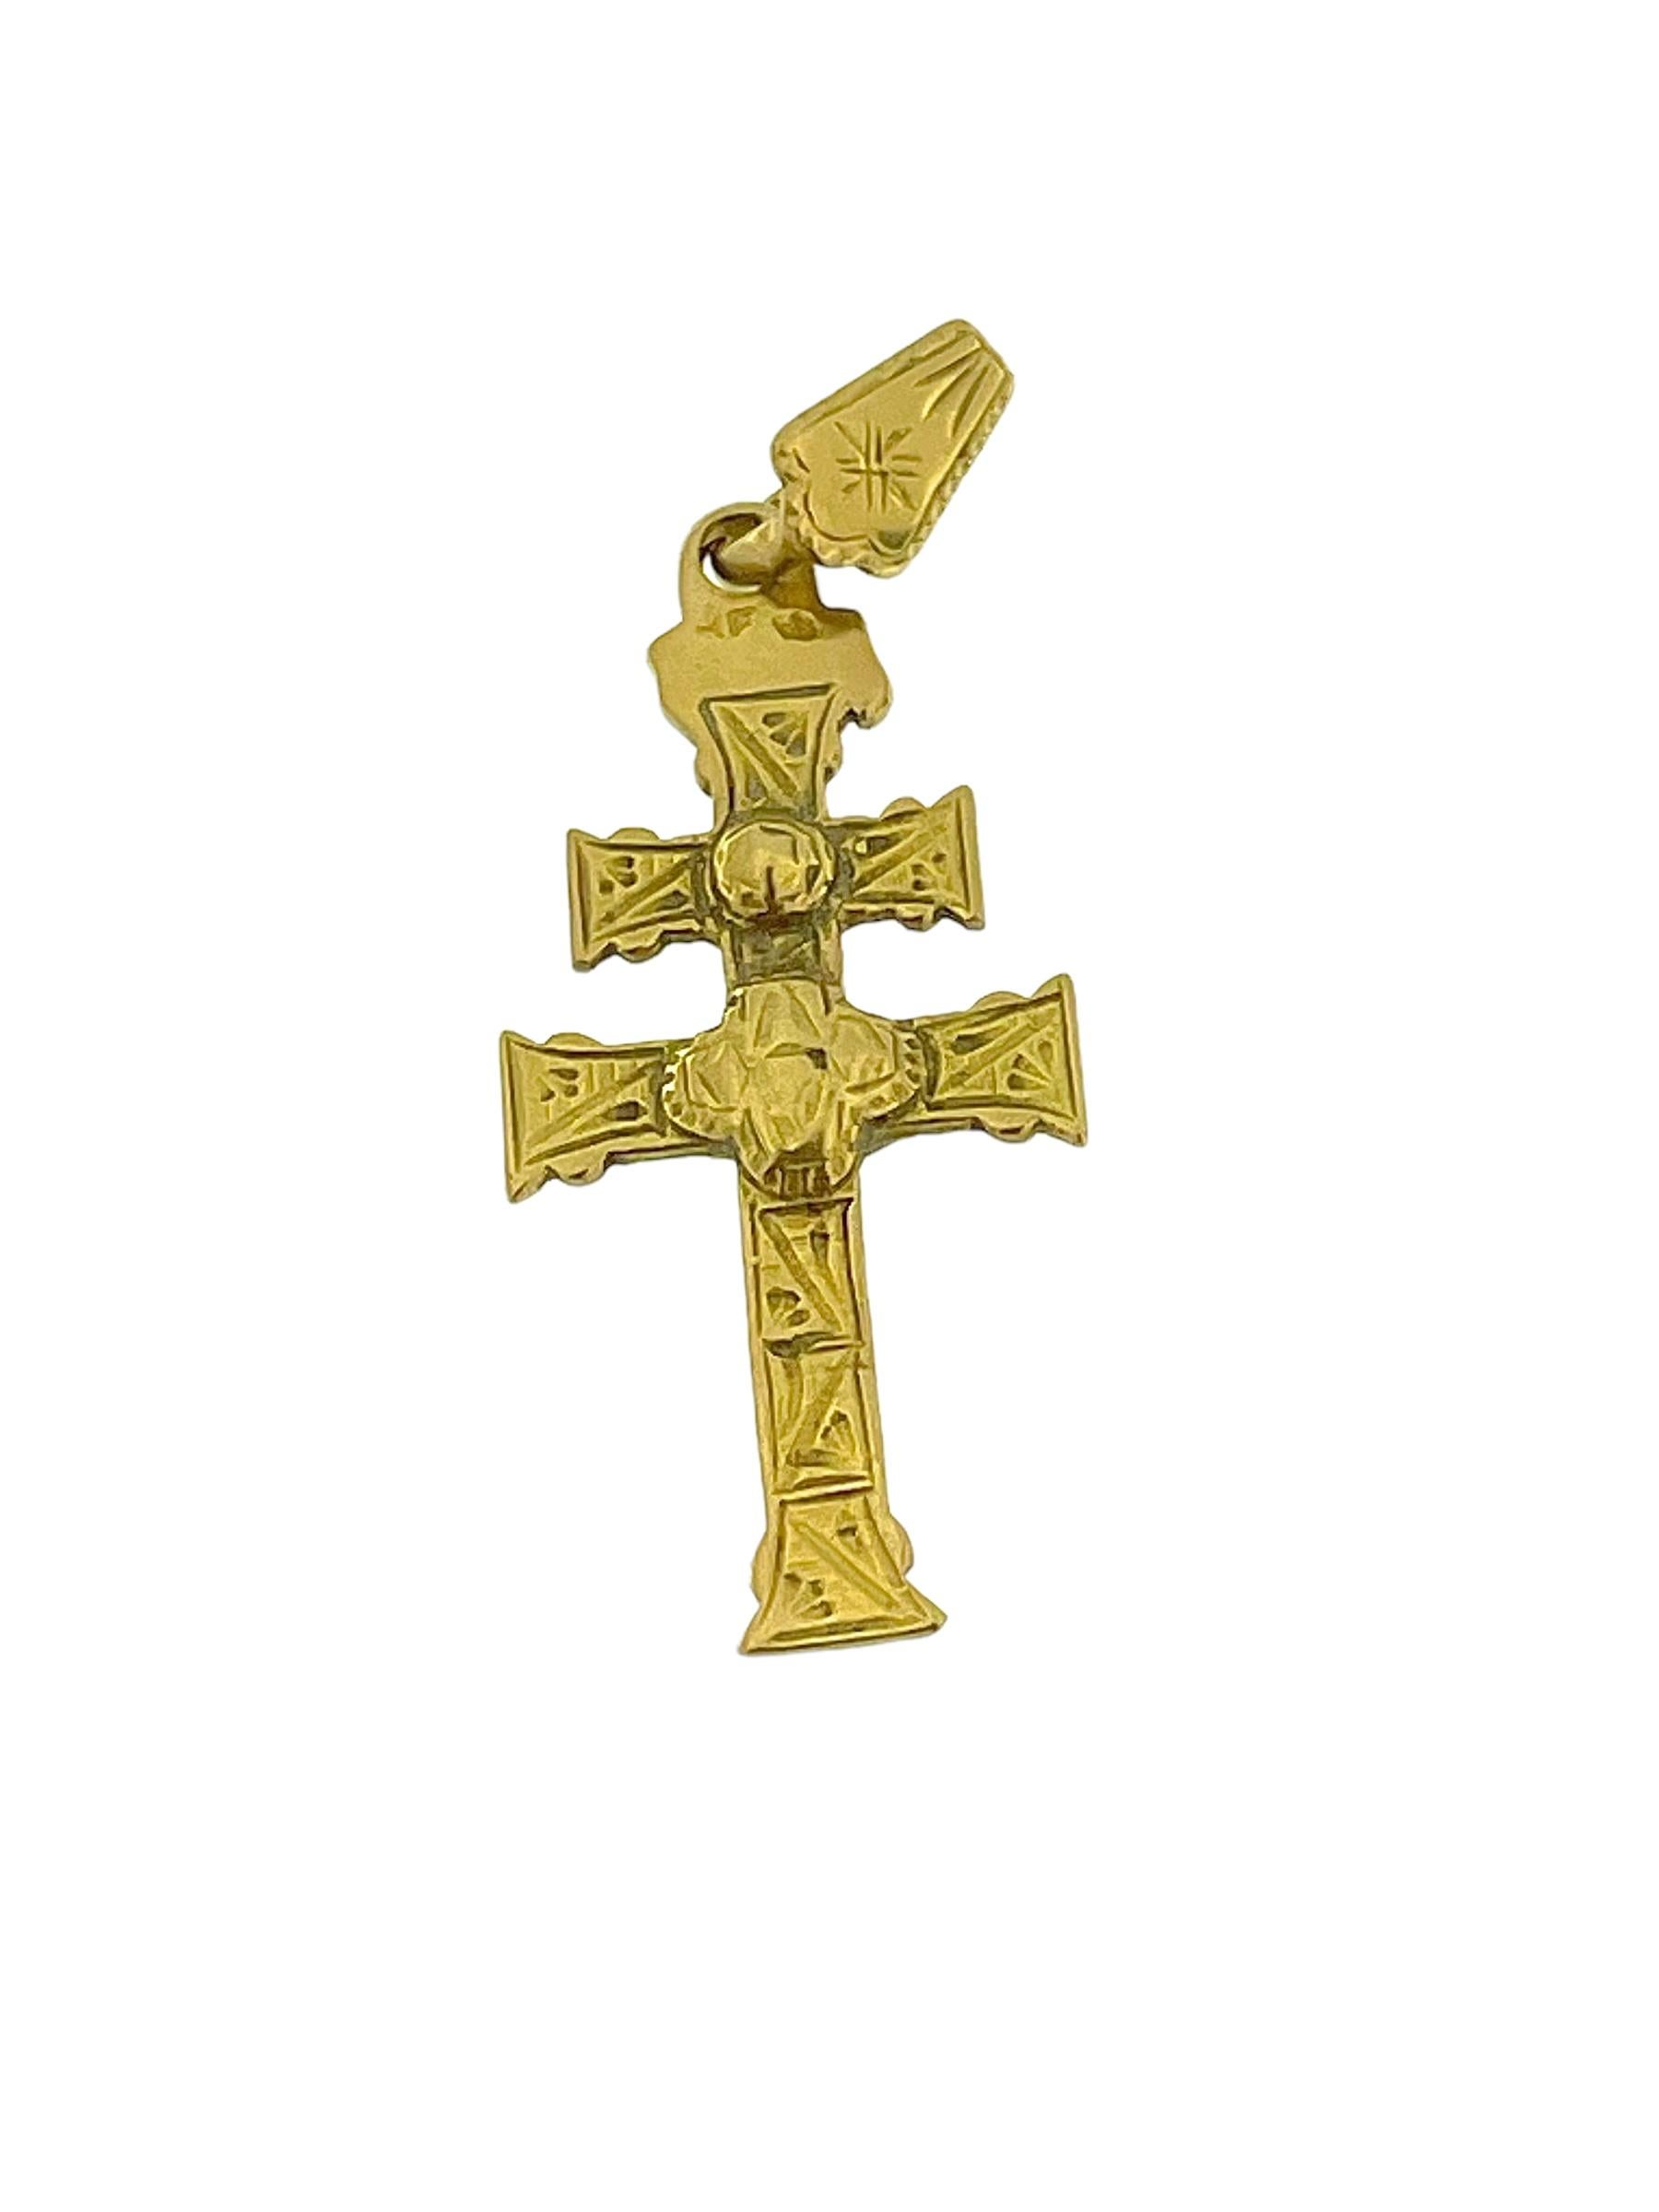 The Antique Caravaca Cross in 18 karat Yellow Gold is a magnificent piece of religious jewelry that carries rich history and symbolism. Originating from the Spanish town of Caravaca, this cross is revered for its unique double-sided design and its